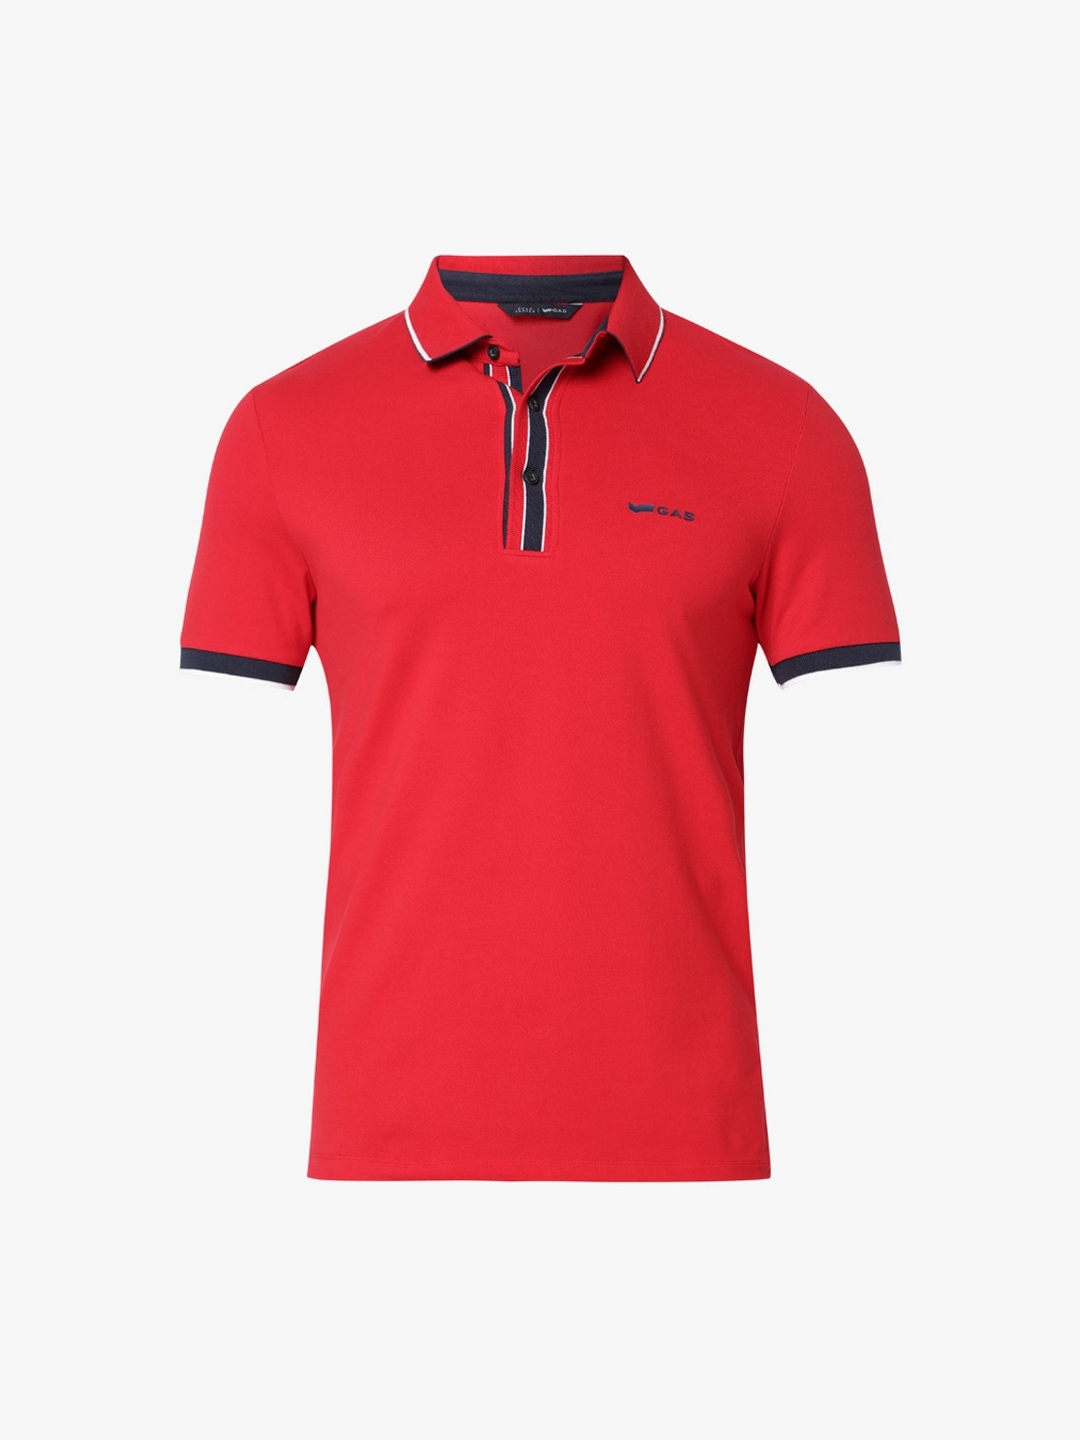 AGAP Solid Red Slim Fit Polo T-shirt